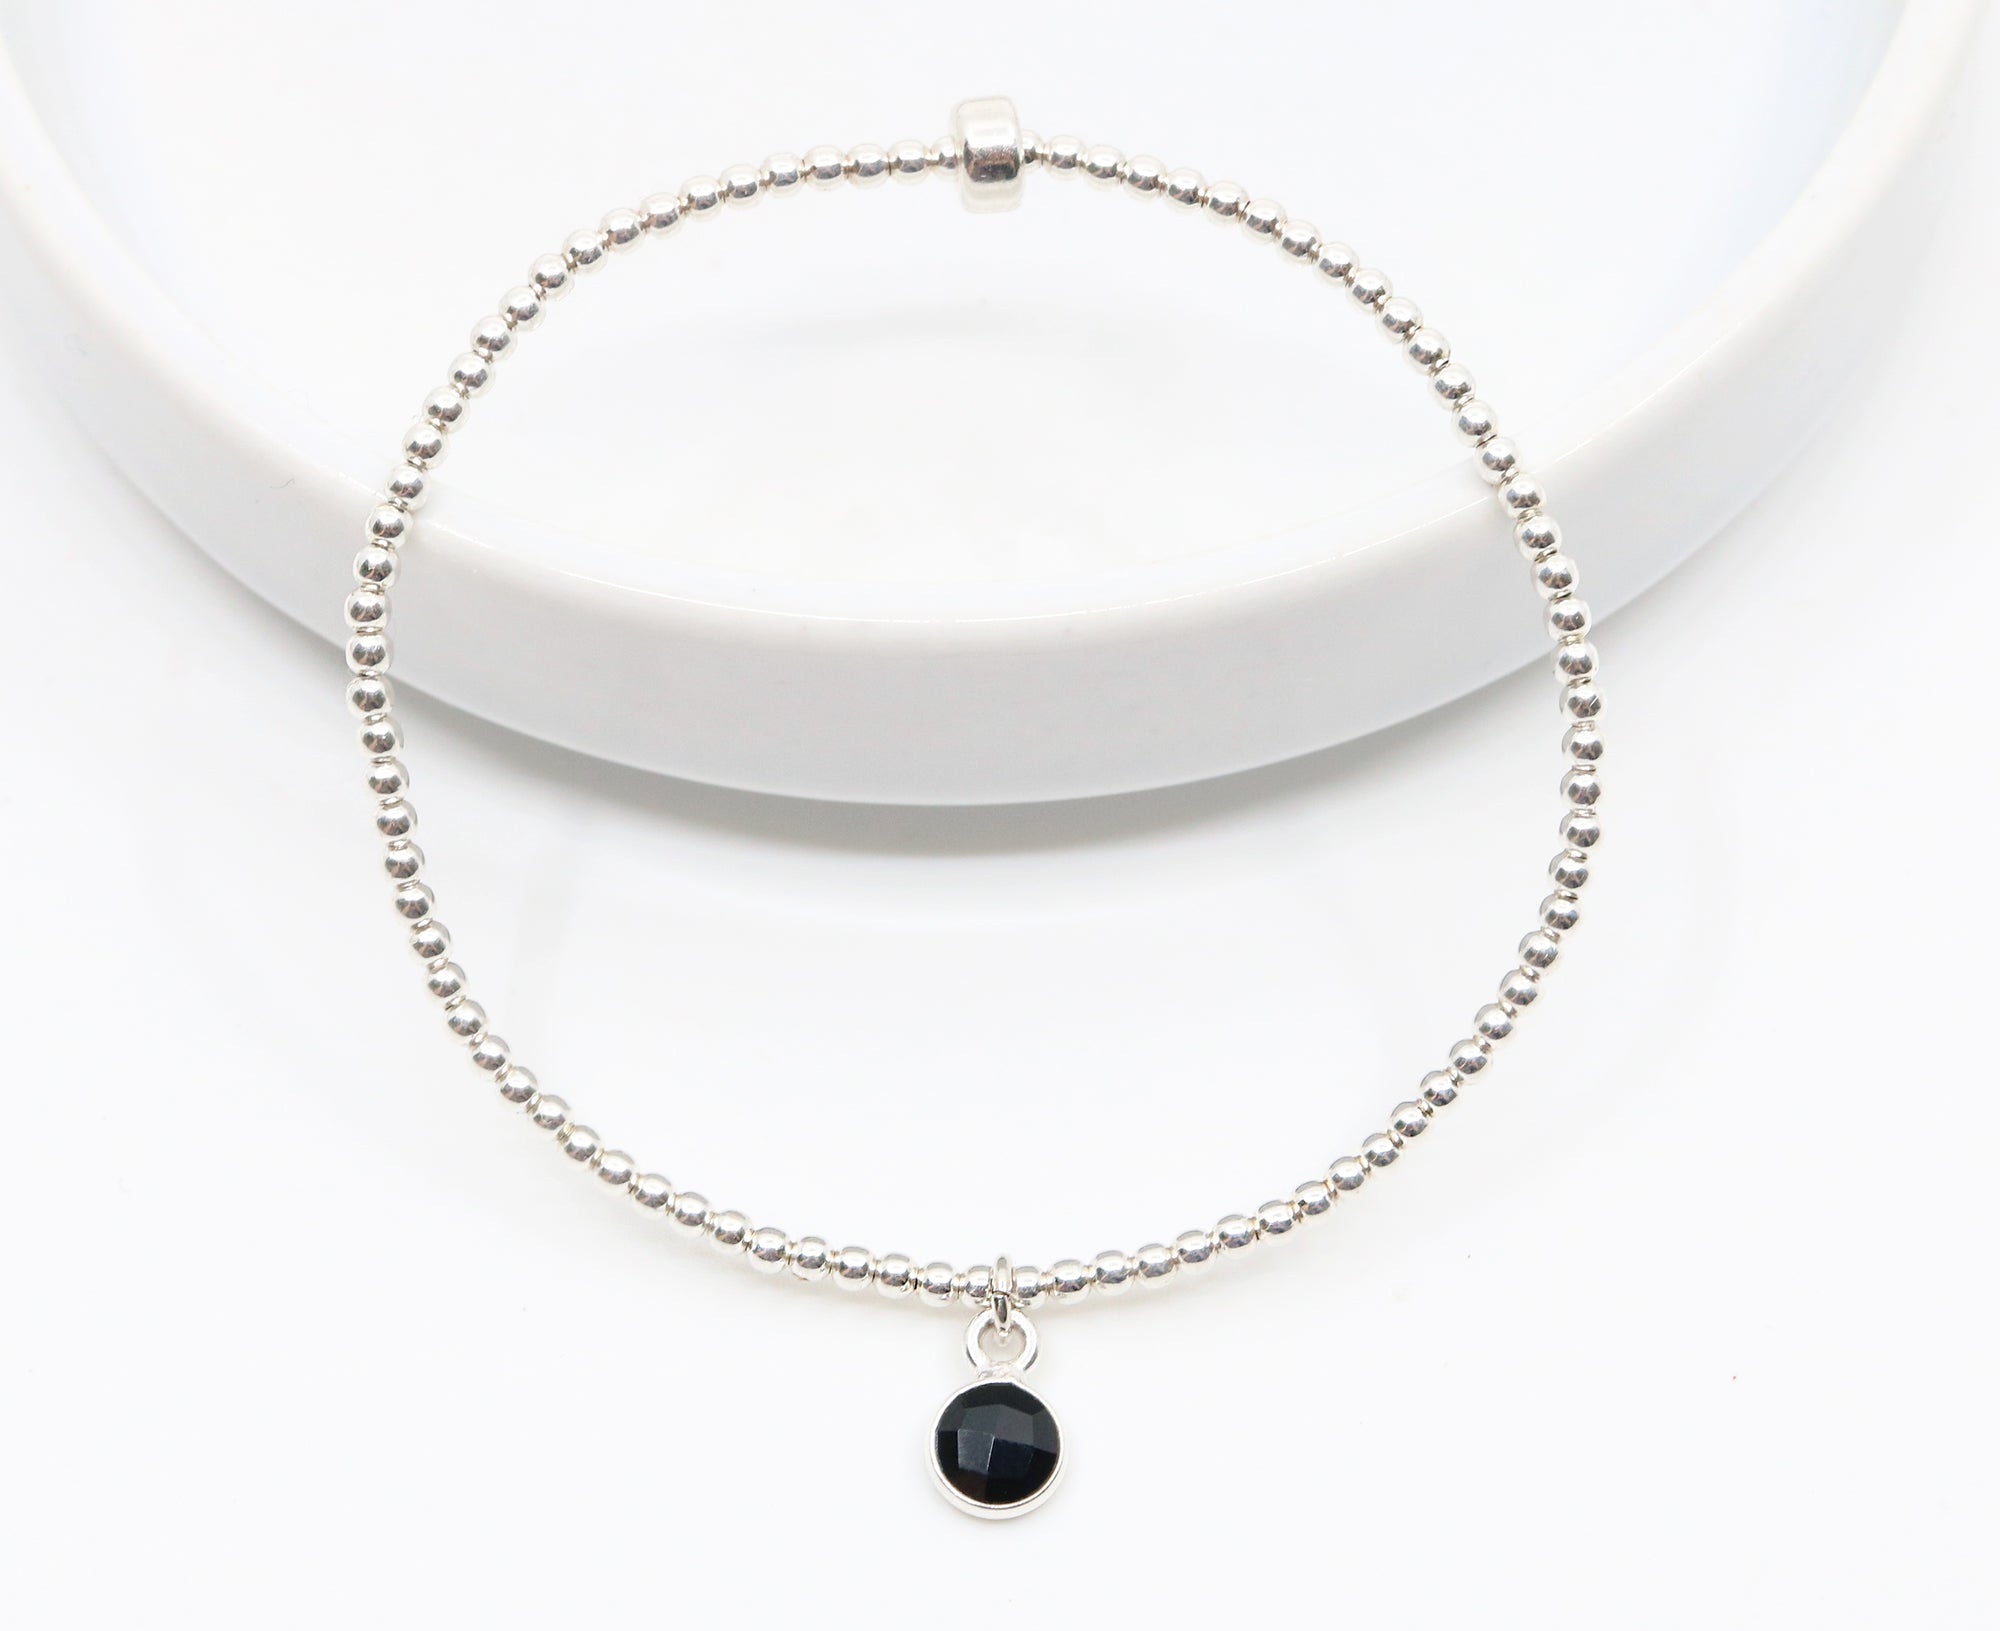 Small onyx gemstone circle pendant encased in sterling silver dangling from a sterling silver beaded stretch bracelet and displayed on white background